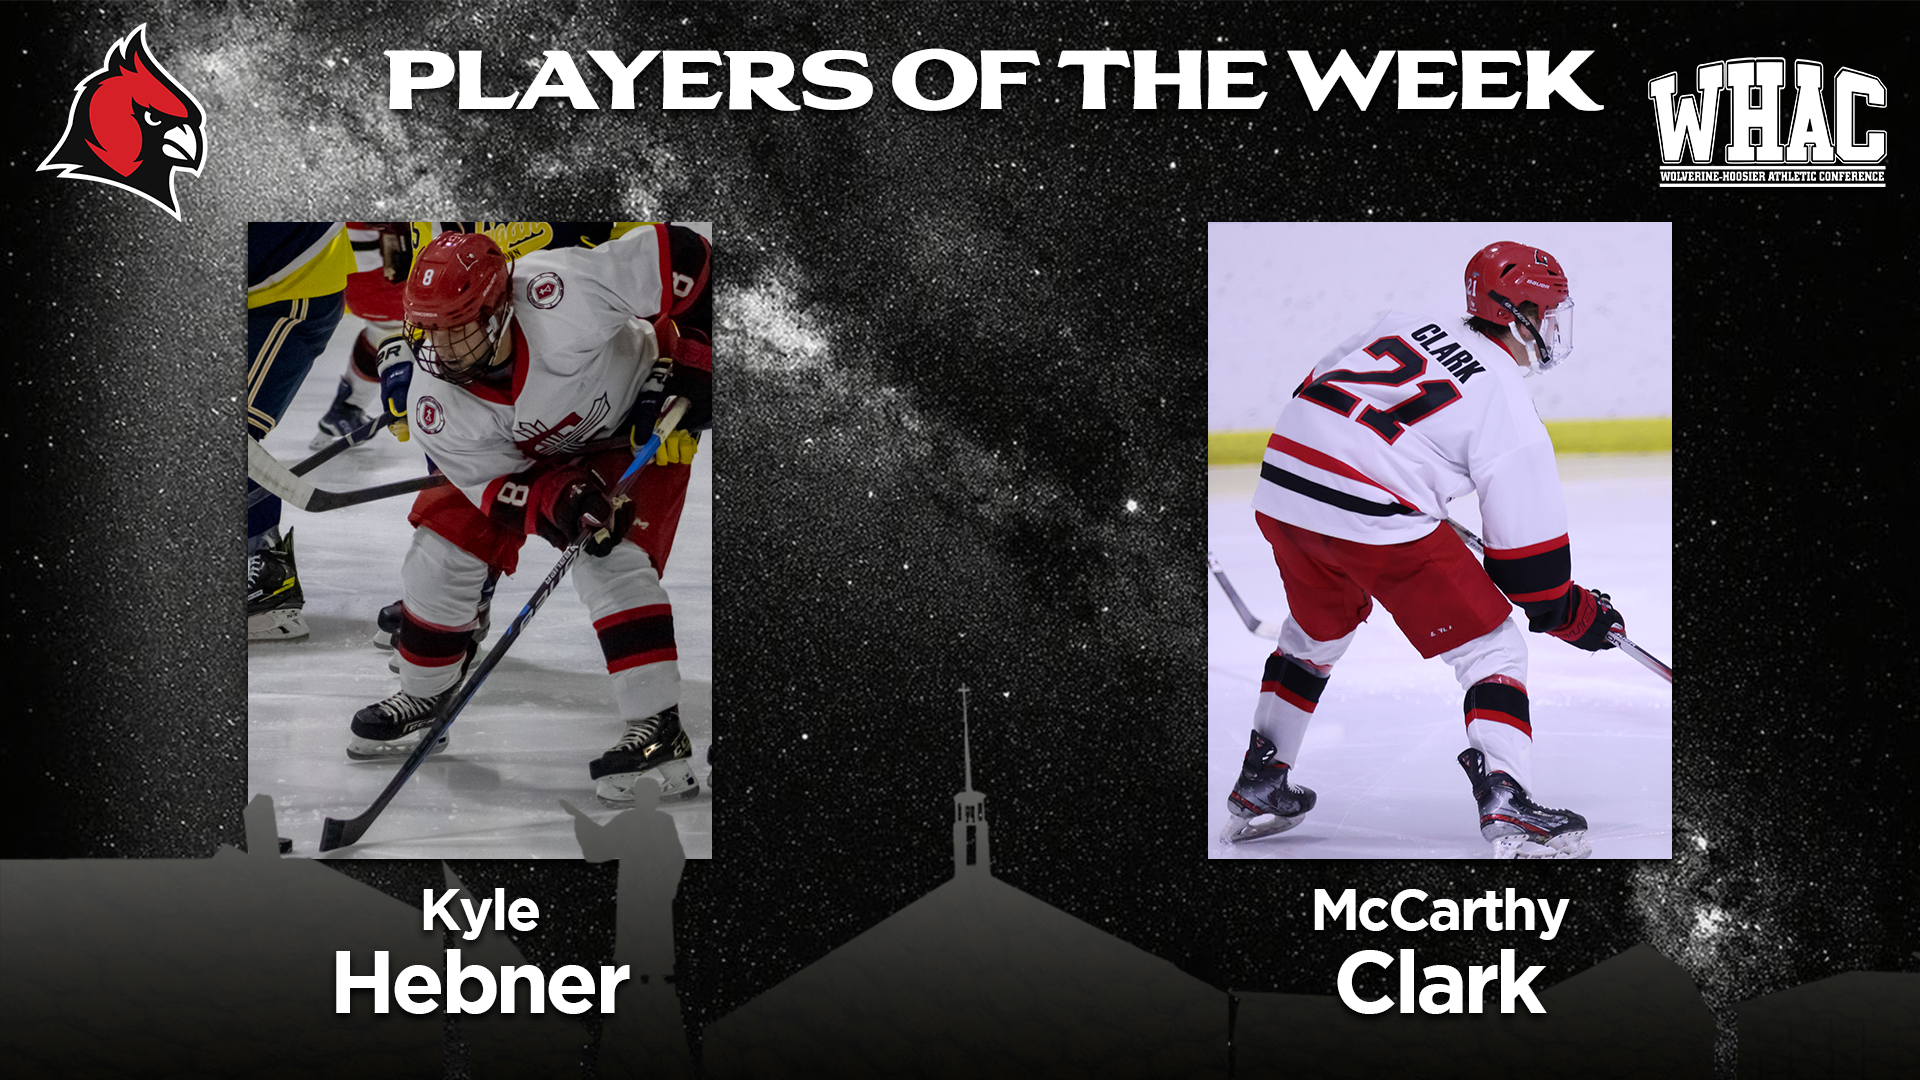 Hebner and Clark sweep WHAC Player of the Week honors